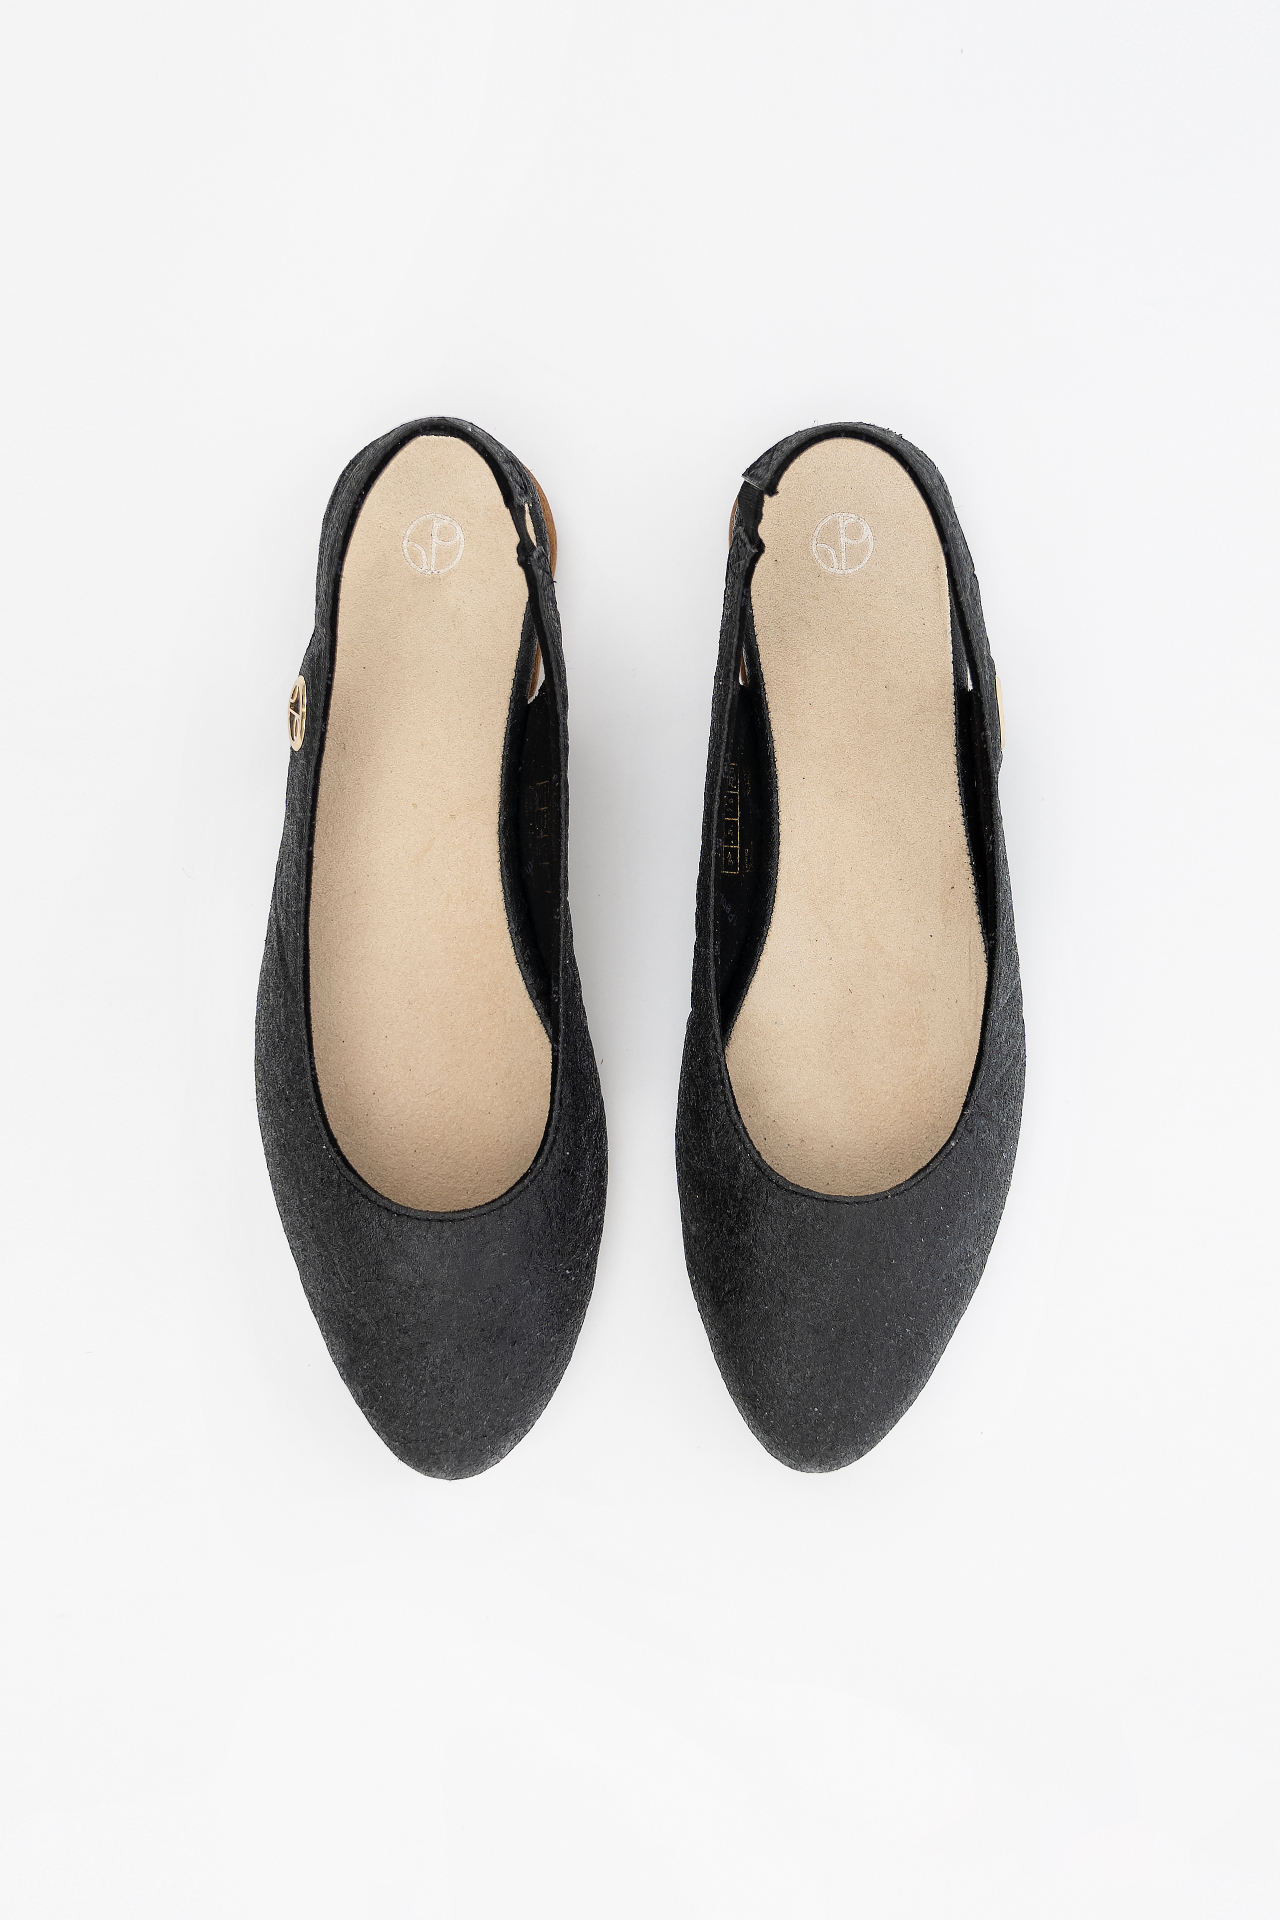 1 People - Cannes - Sling Back Flat Shoes - Charcoal